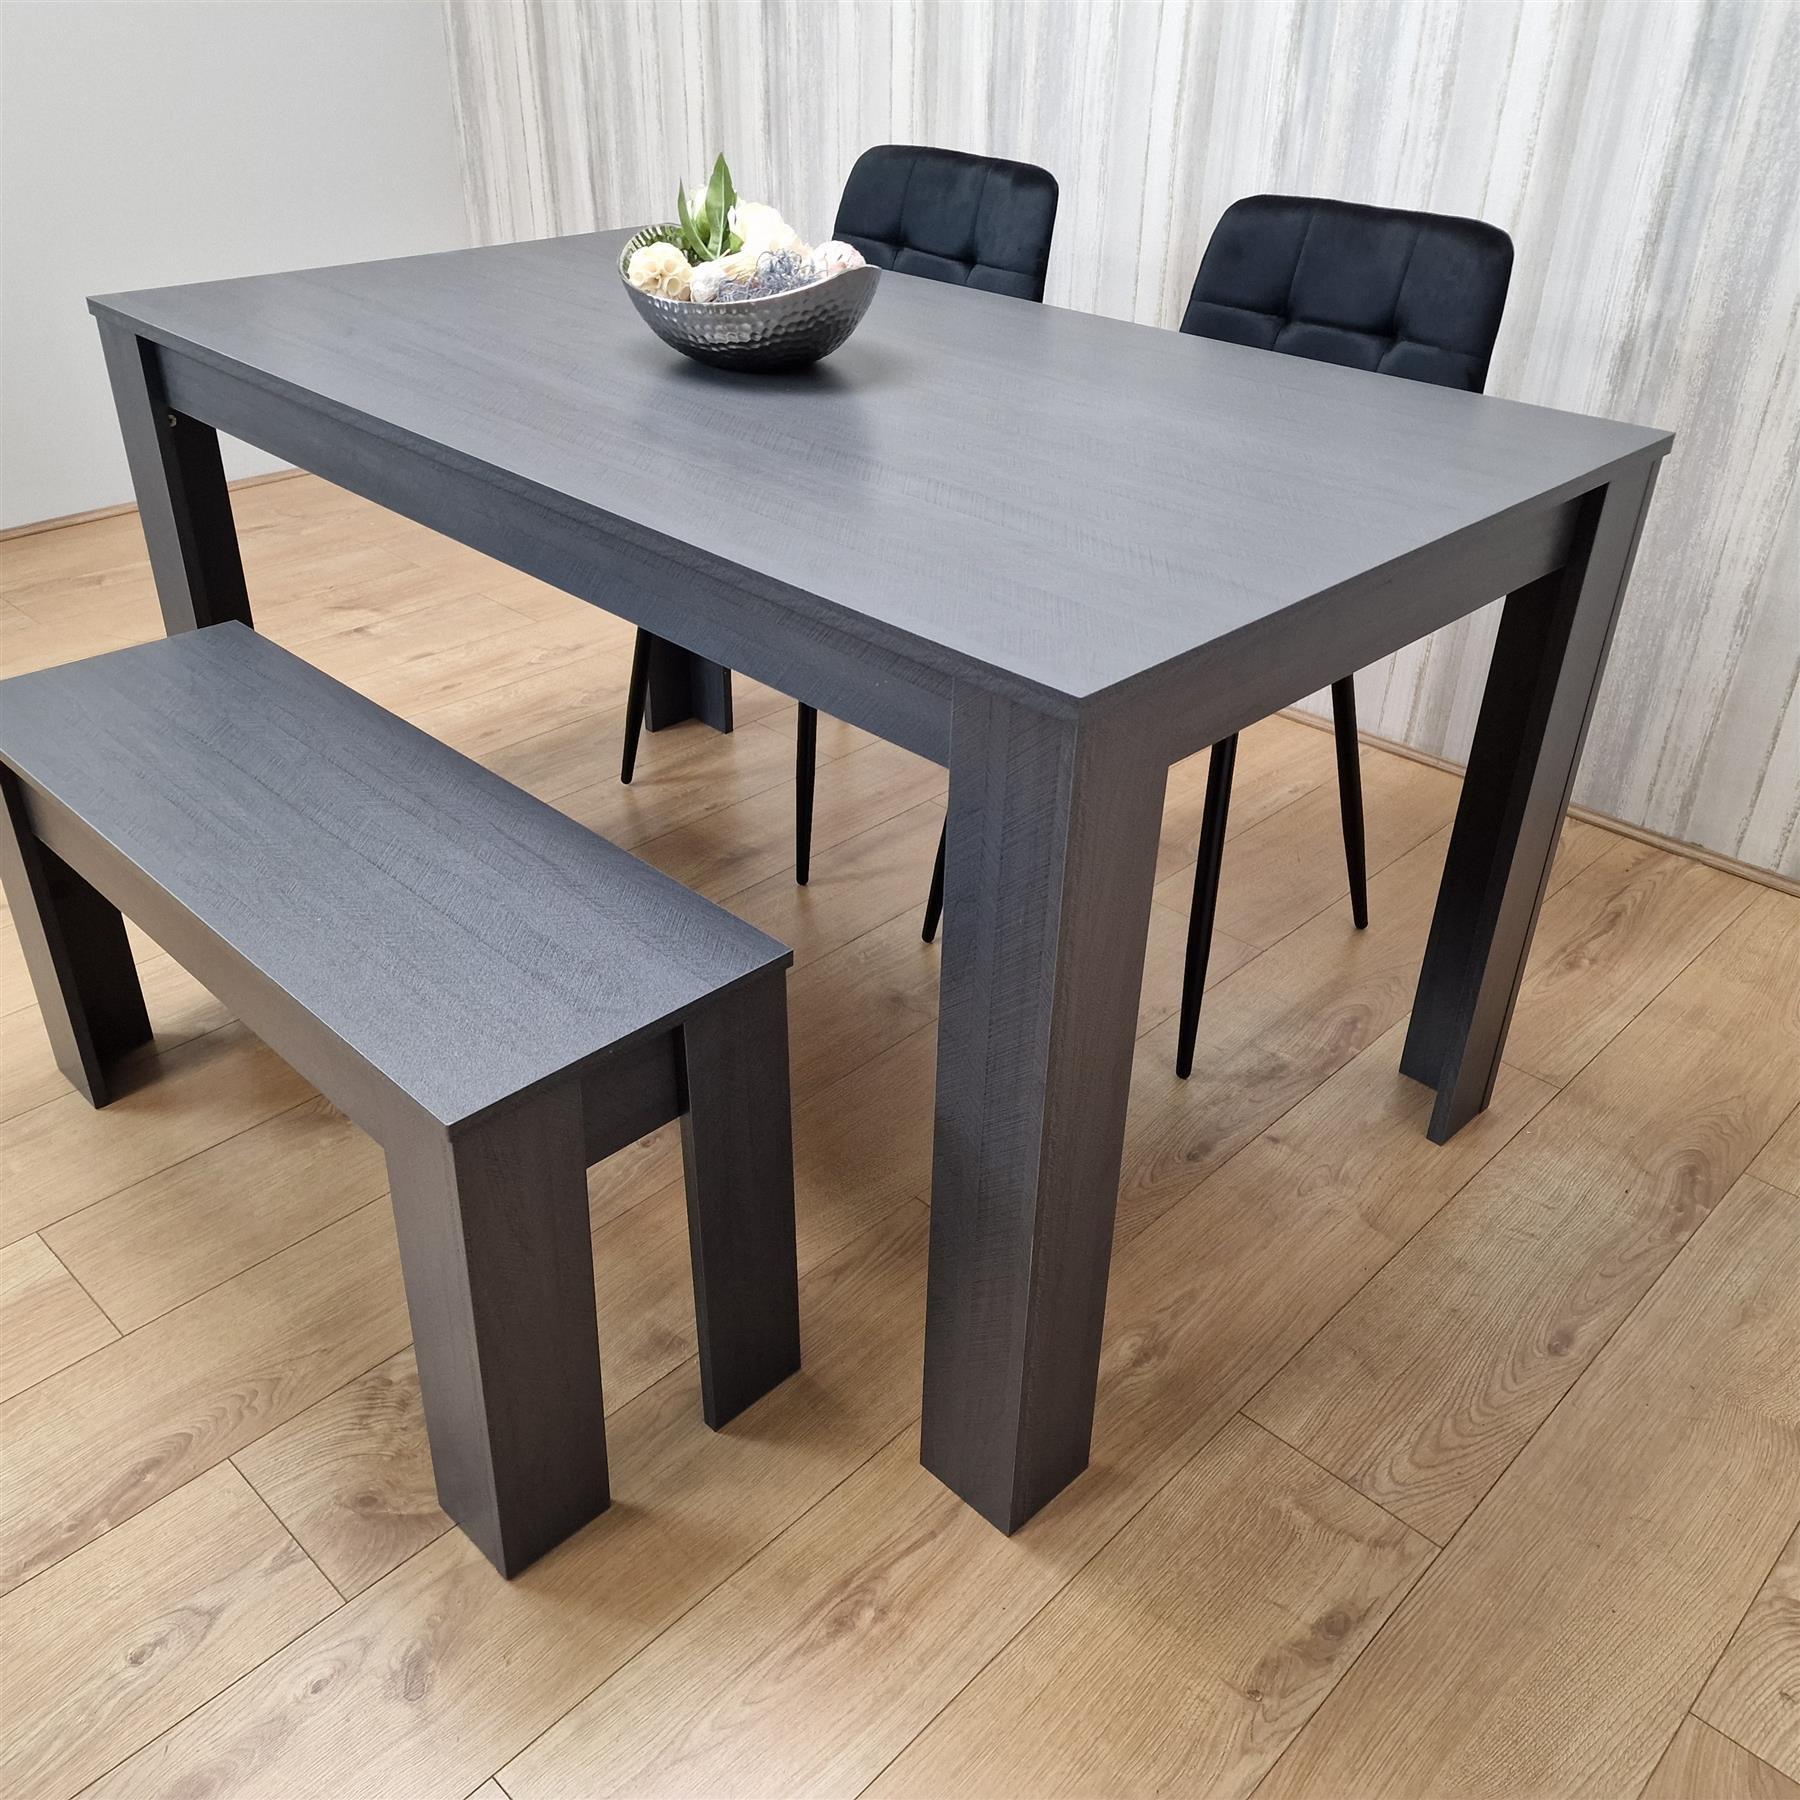 Dining Table Set with 2 Chairs Dining Room and Kitchen table set of 2, and Bench